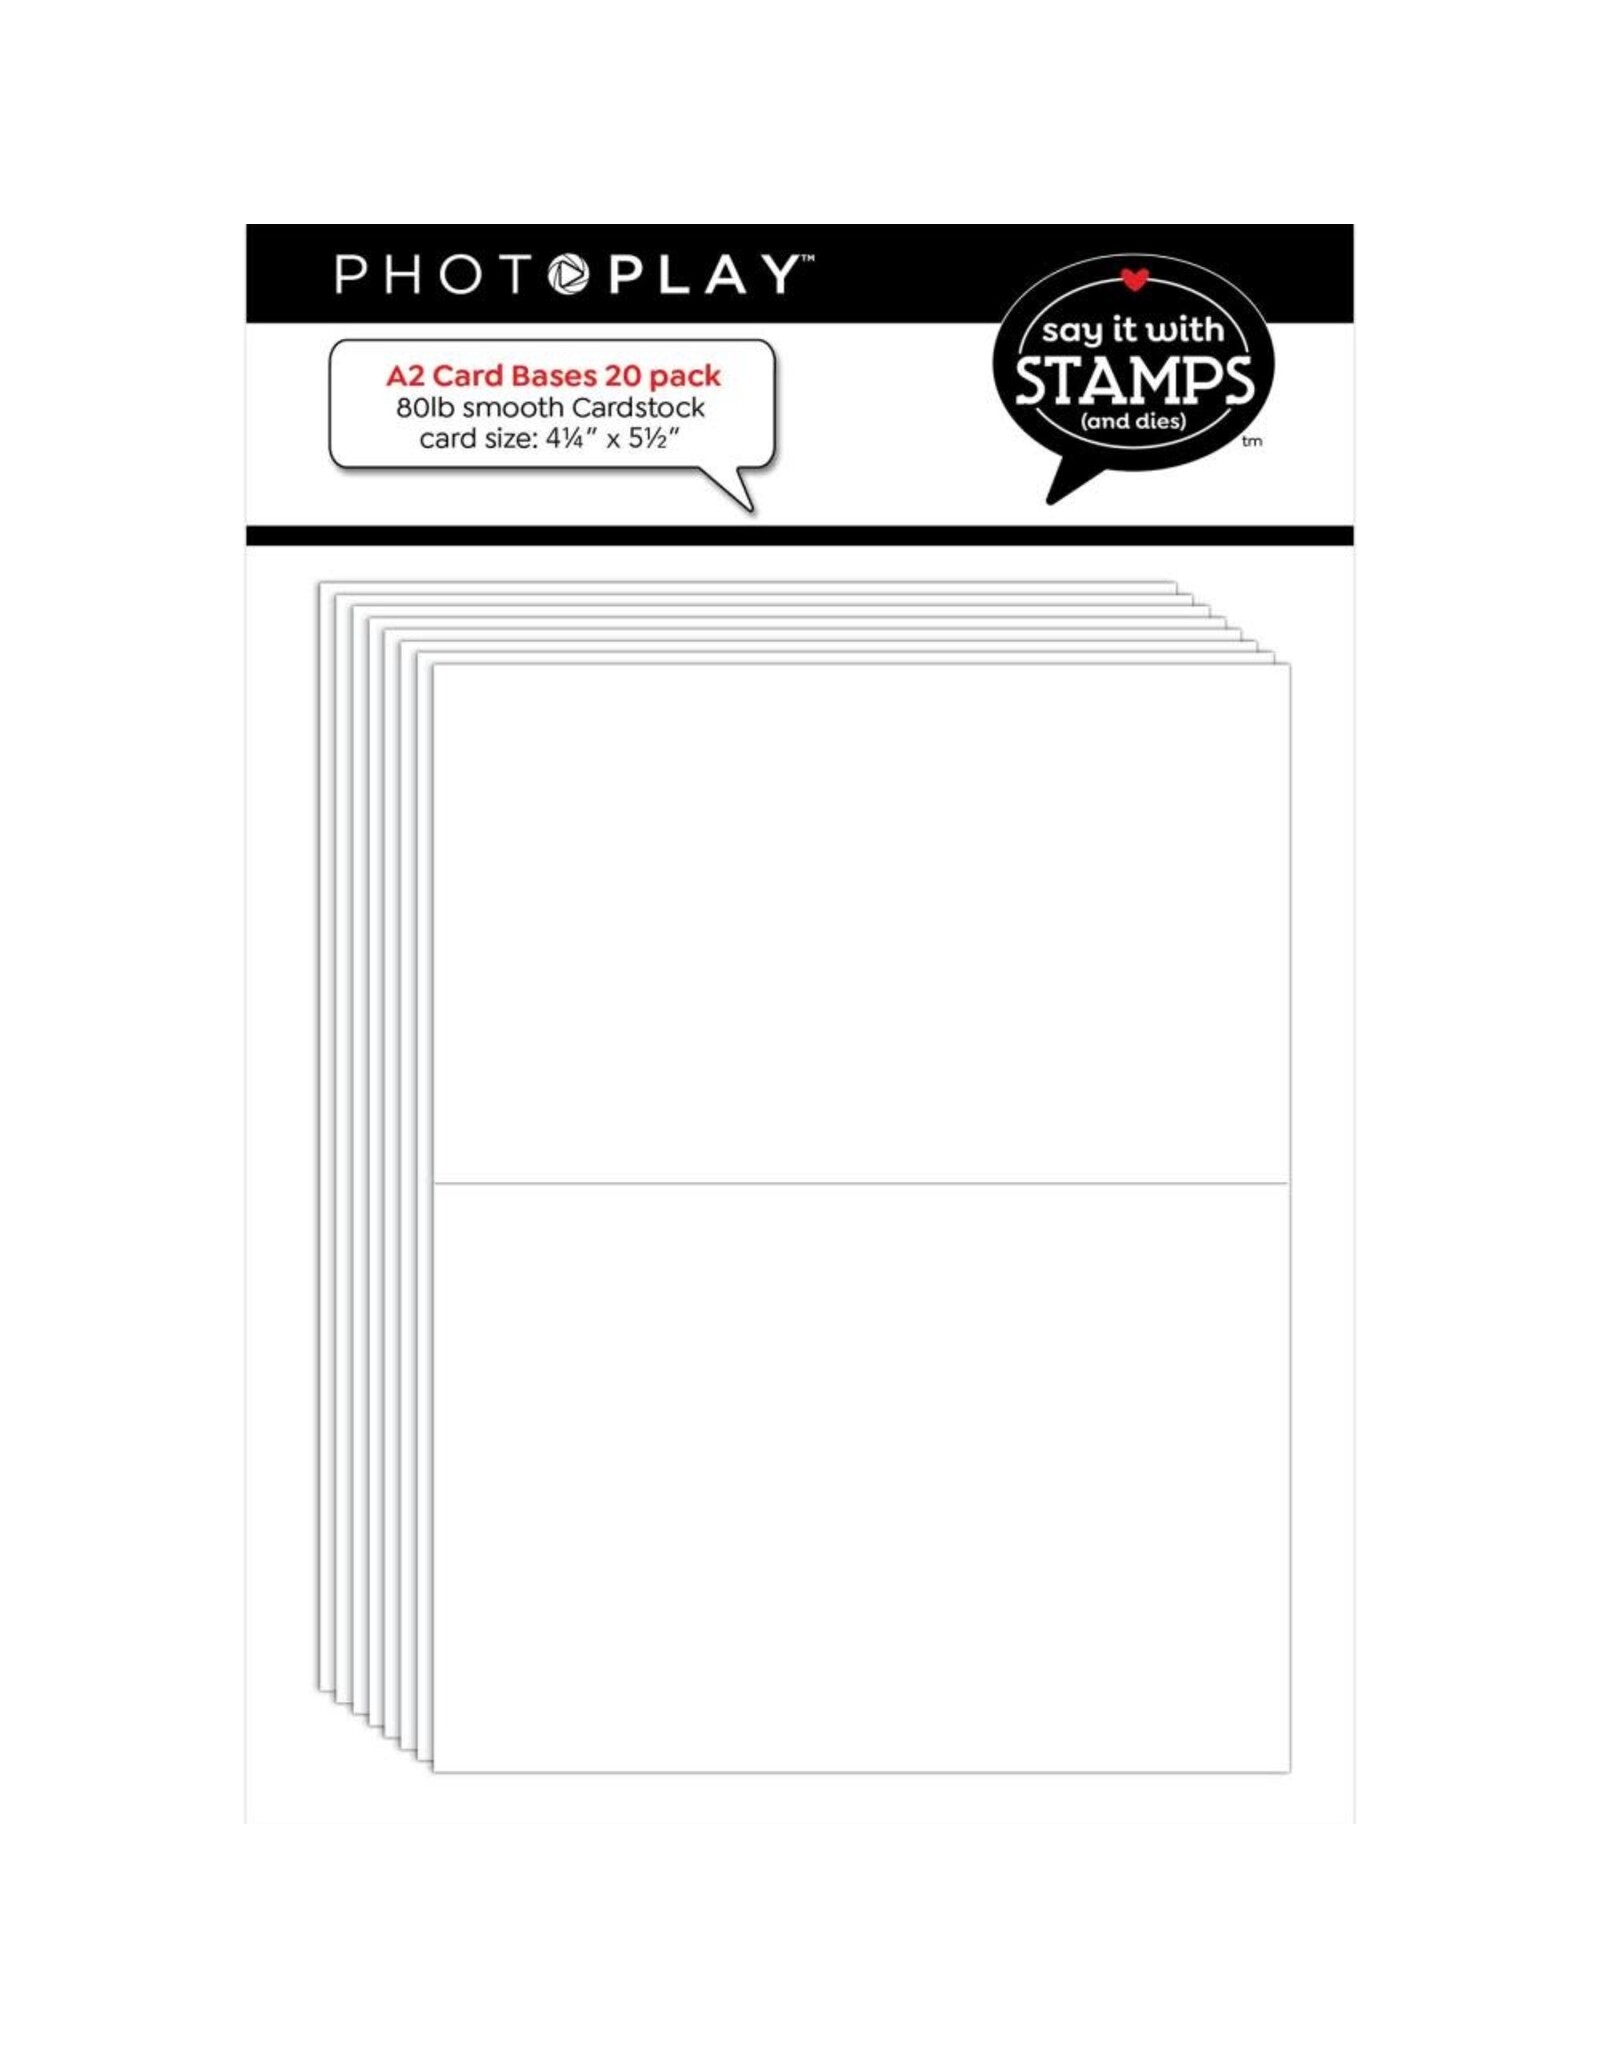 PHOTOPLAY PAPER PHOTOPLAY SAY IT WITH STAMPS A2 CARD BASES 20/PACK